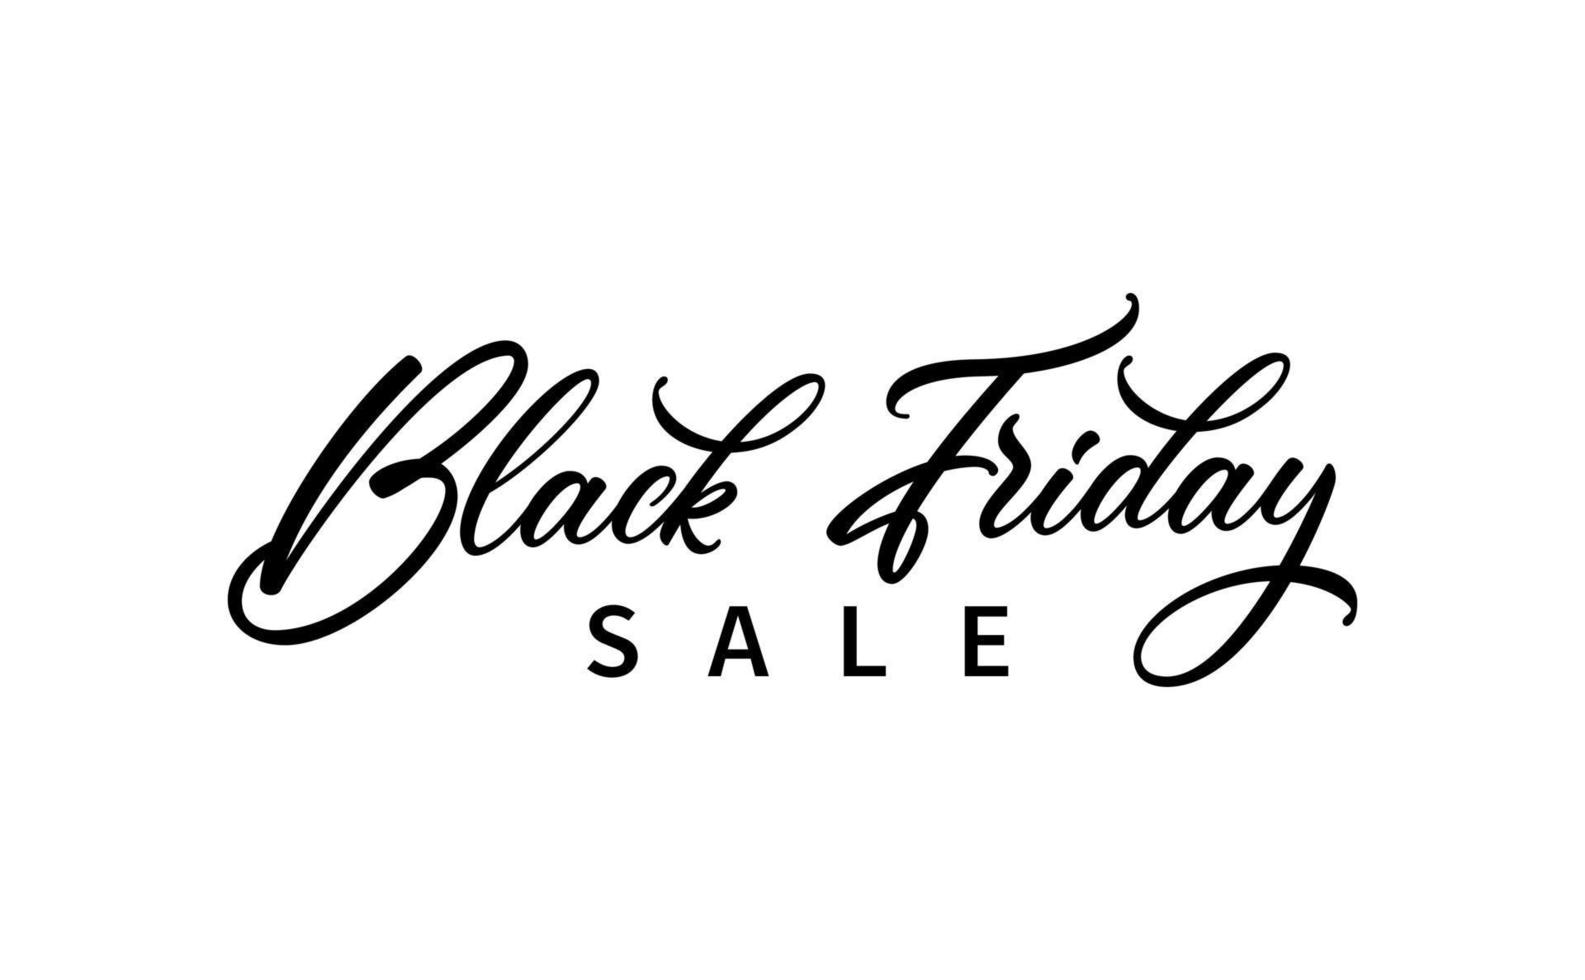 Black Friday Sale text design. Modern hand lettering for use in ad, poster, banner design. vector